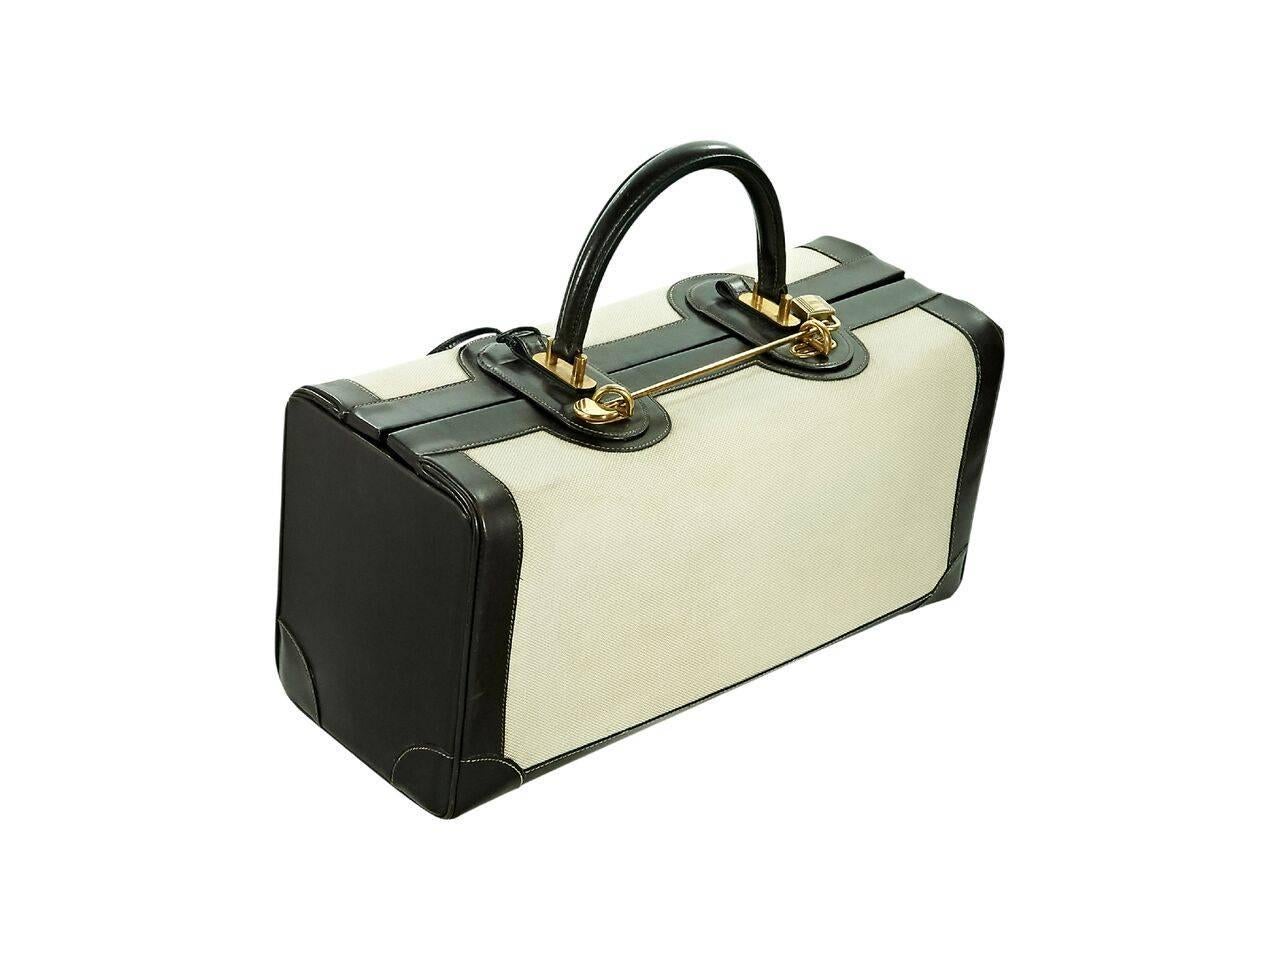 Product details:  Vintage tan canvas hand trunk by Hermes.  Trimmed with brown leather.  Top carry handle.  Lock and key closure.  Lined interior with inner zip and slide pockets.  Protective metal feet.  Goldtone hardware.  16.75"L x